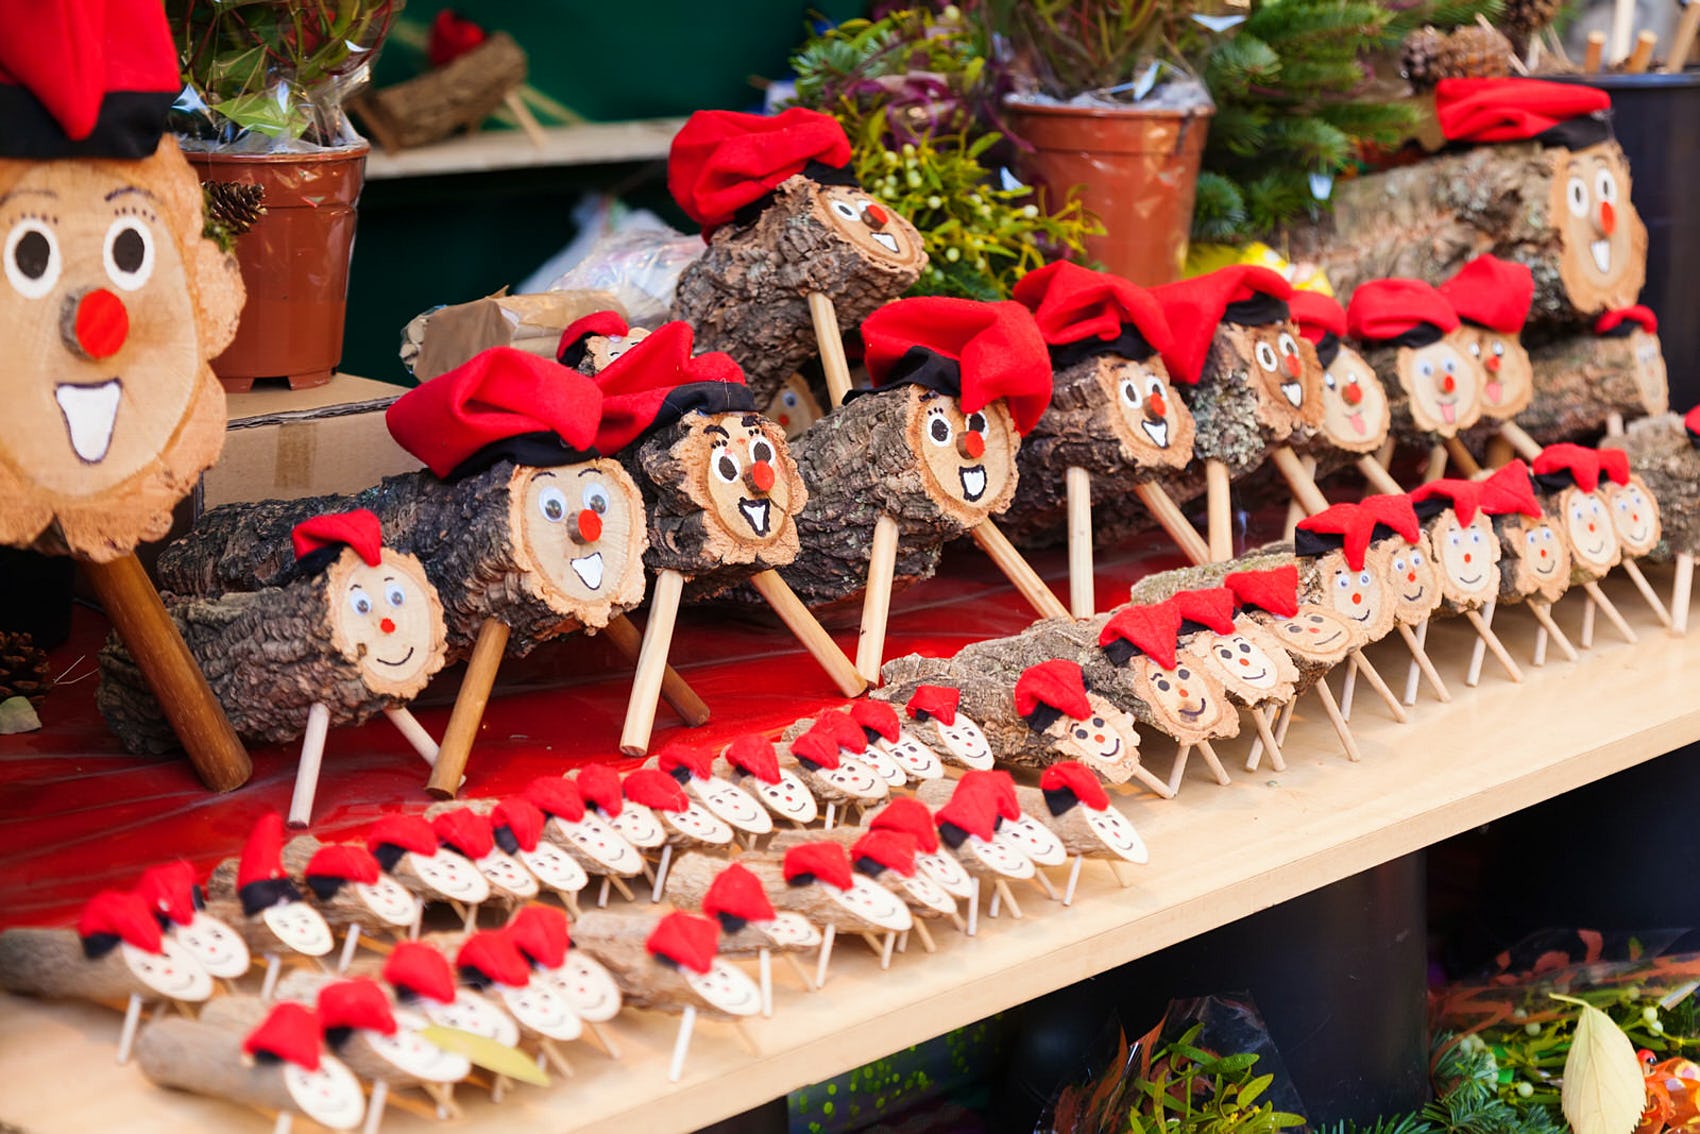 The 10 best Christmas markets in Europe you may not have known about